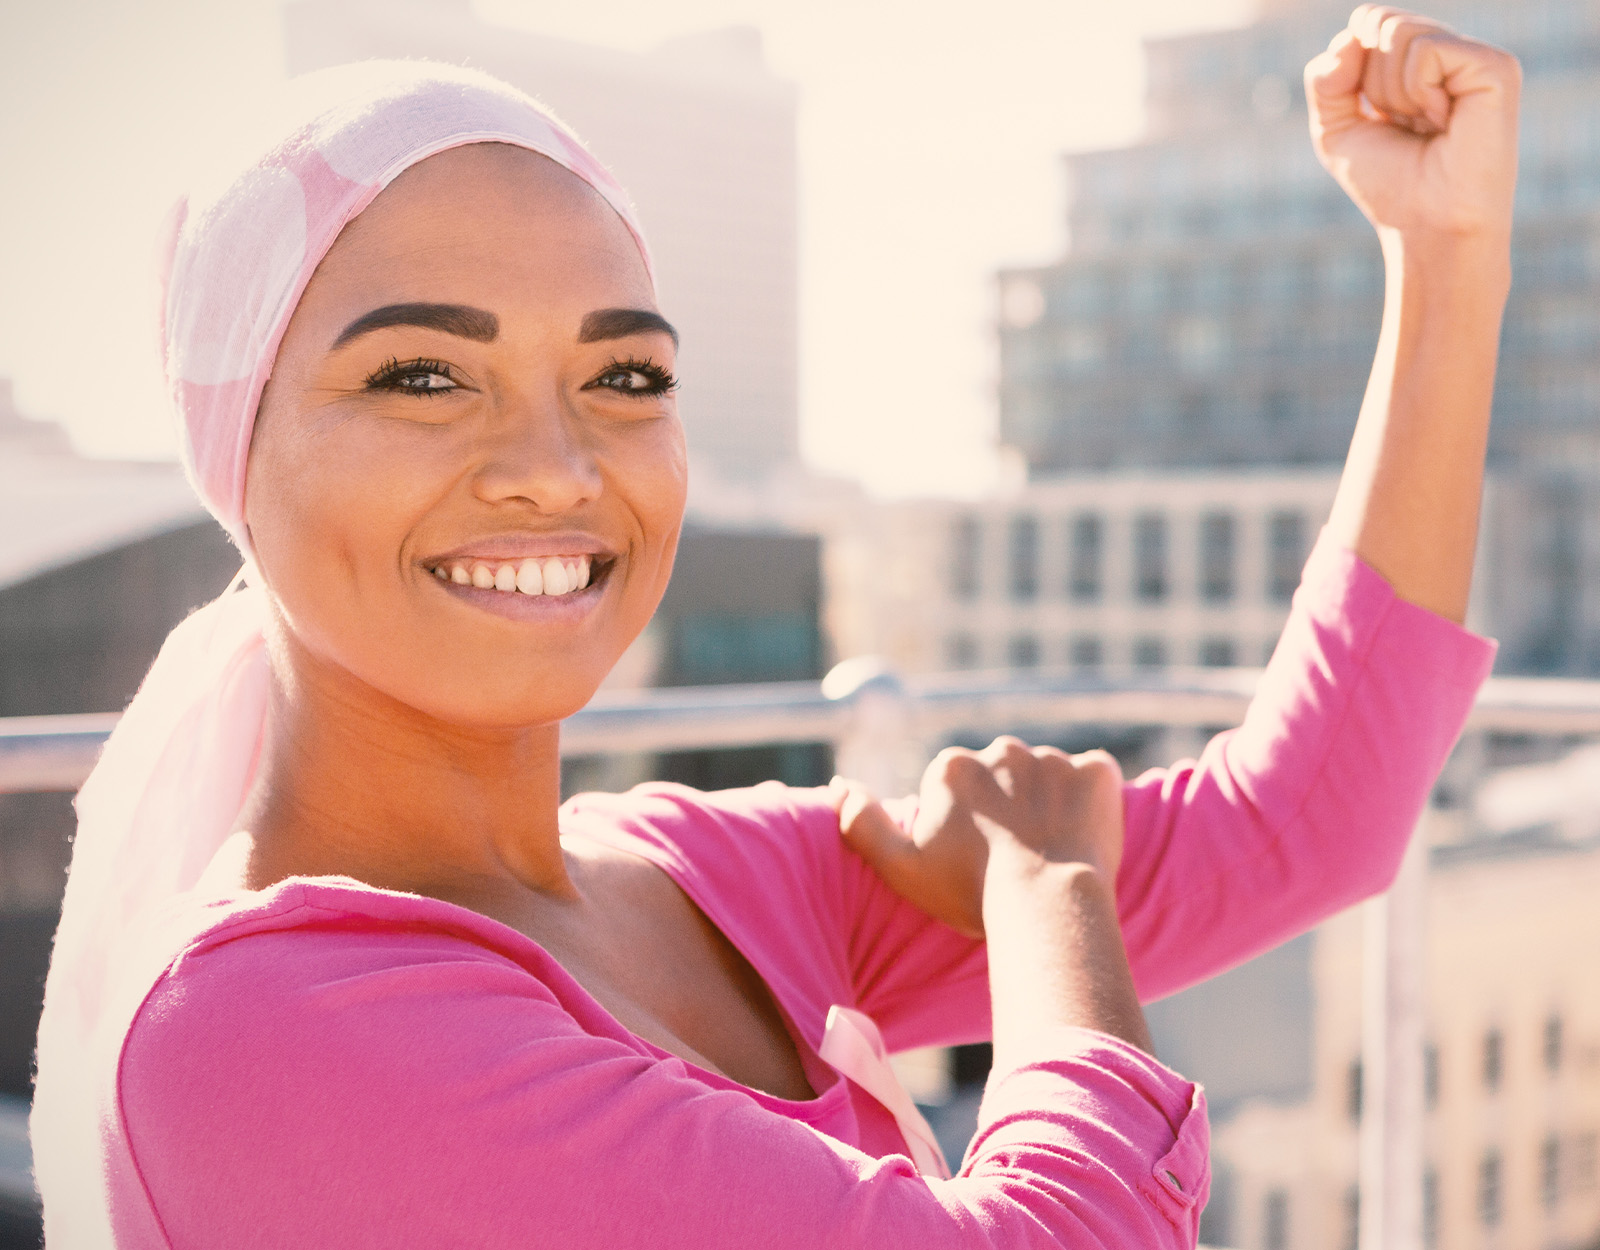 Why We Celebrate Breast Cancer Awareness Month in October